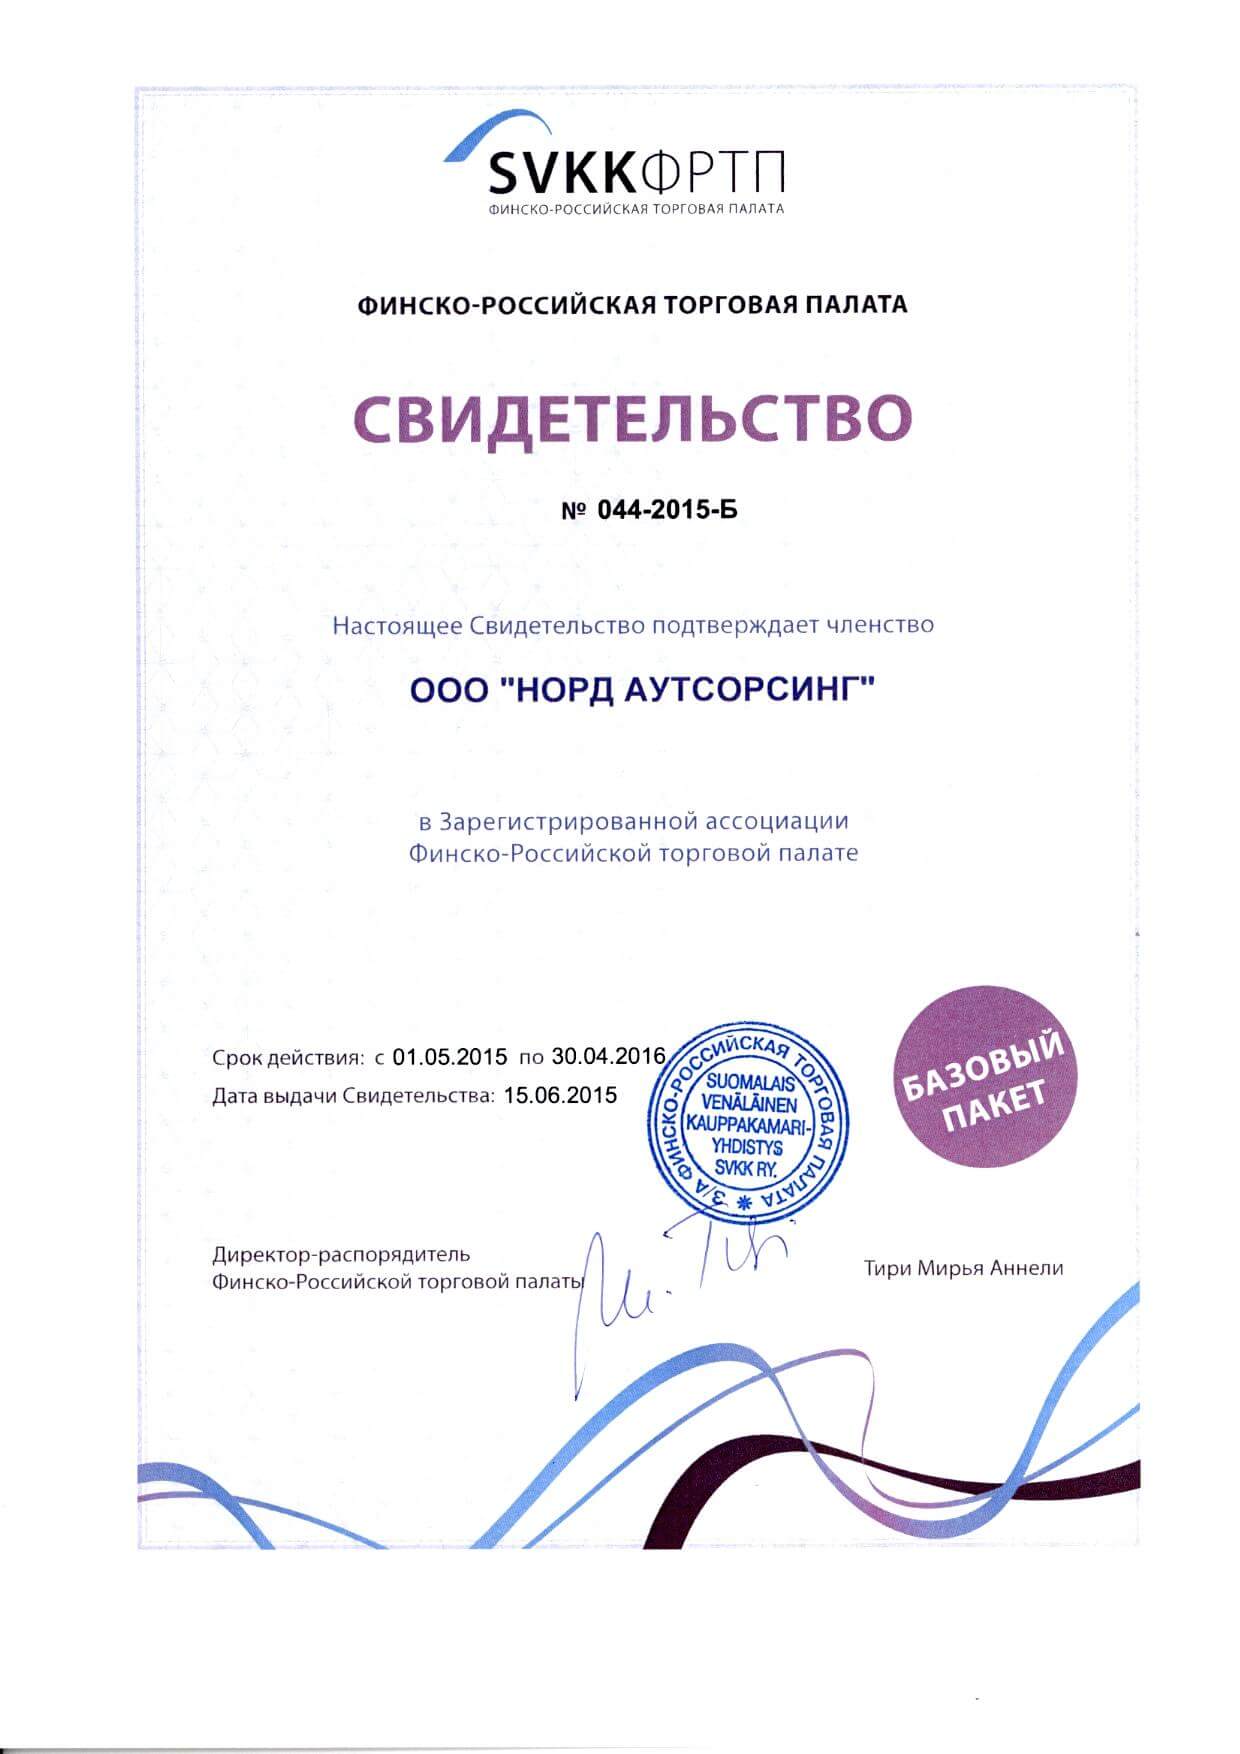 2012 Member of Finnish-Russian Chamber of Commerce